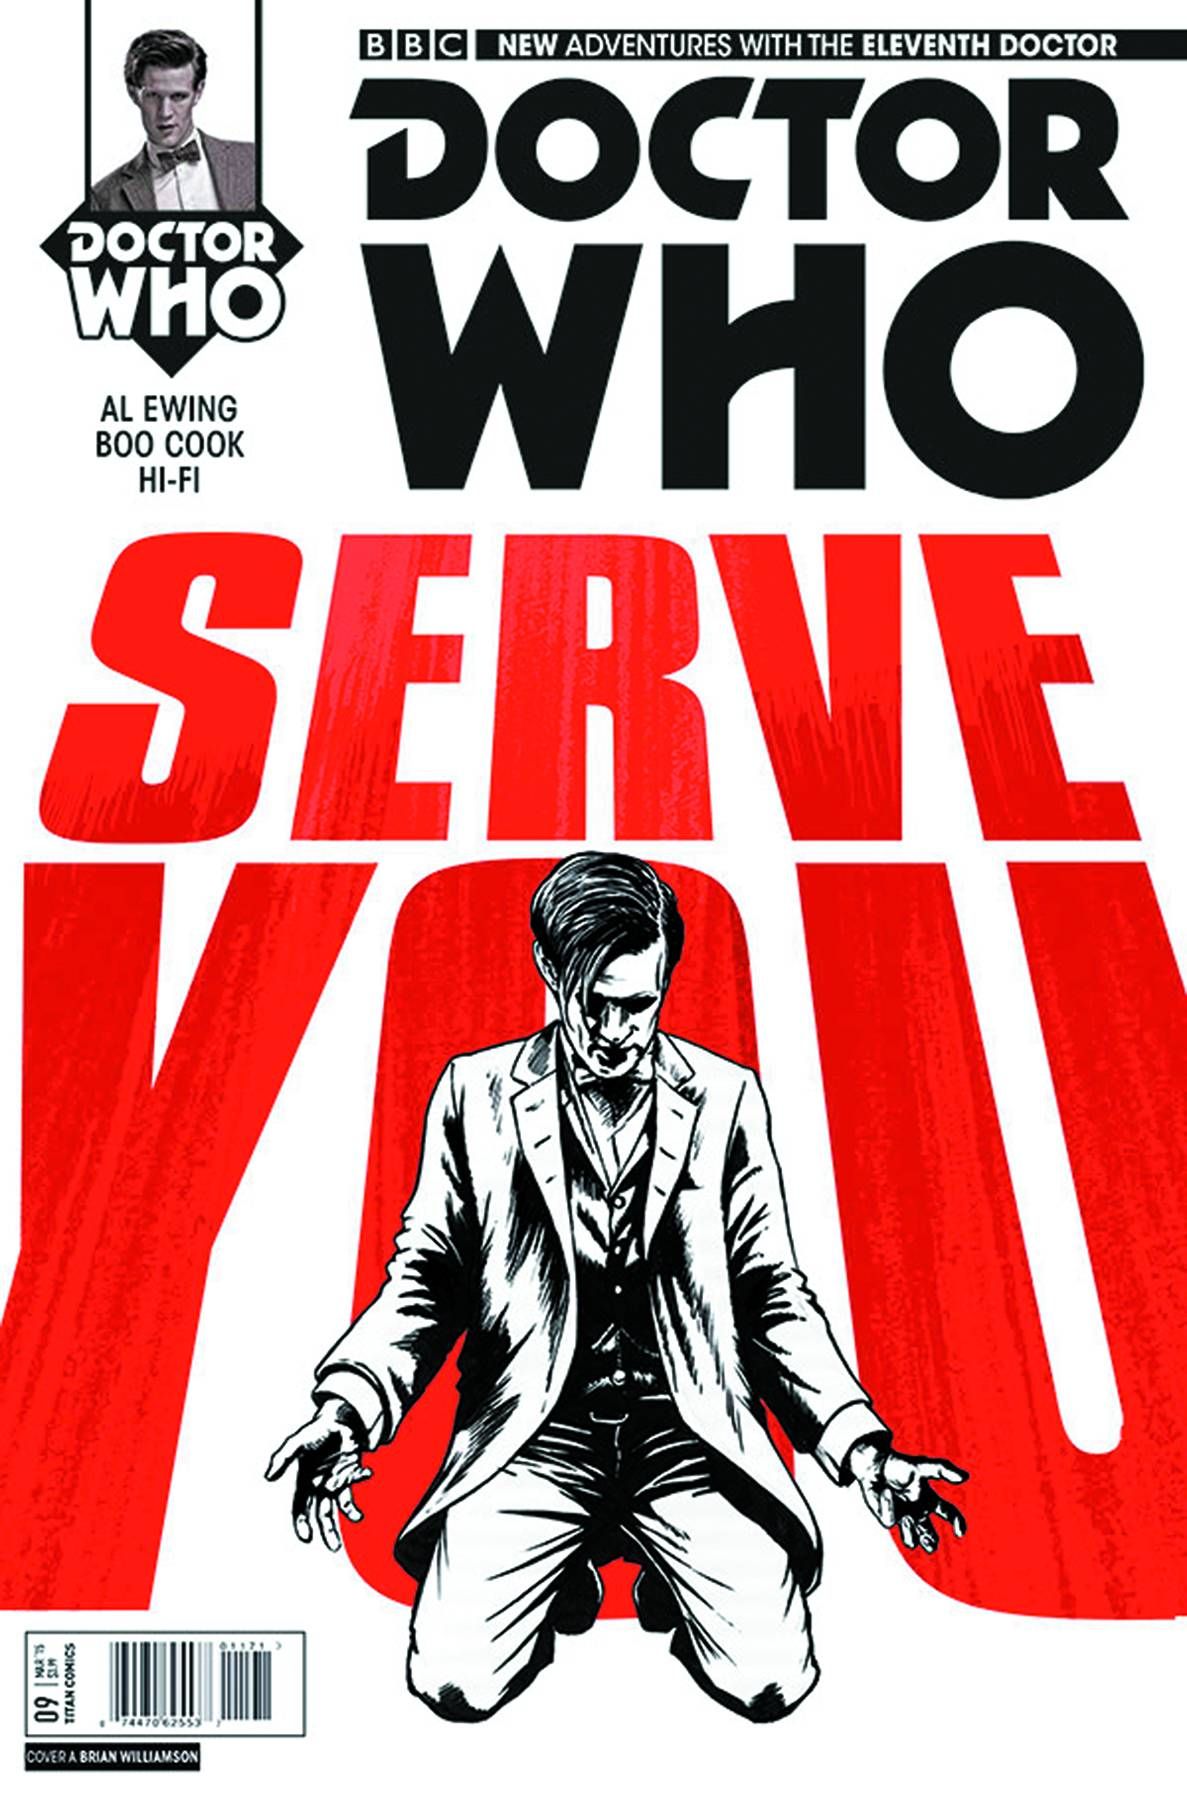 Doctor Who: Eleventh Doctor #9 Comic